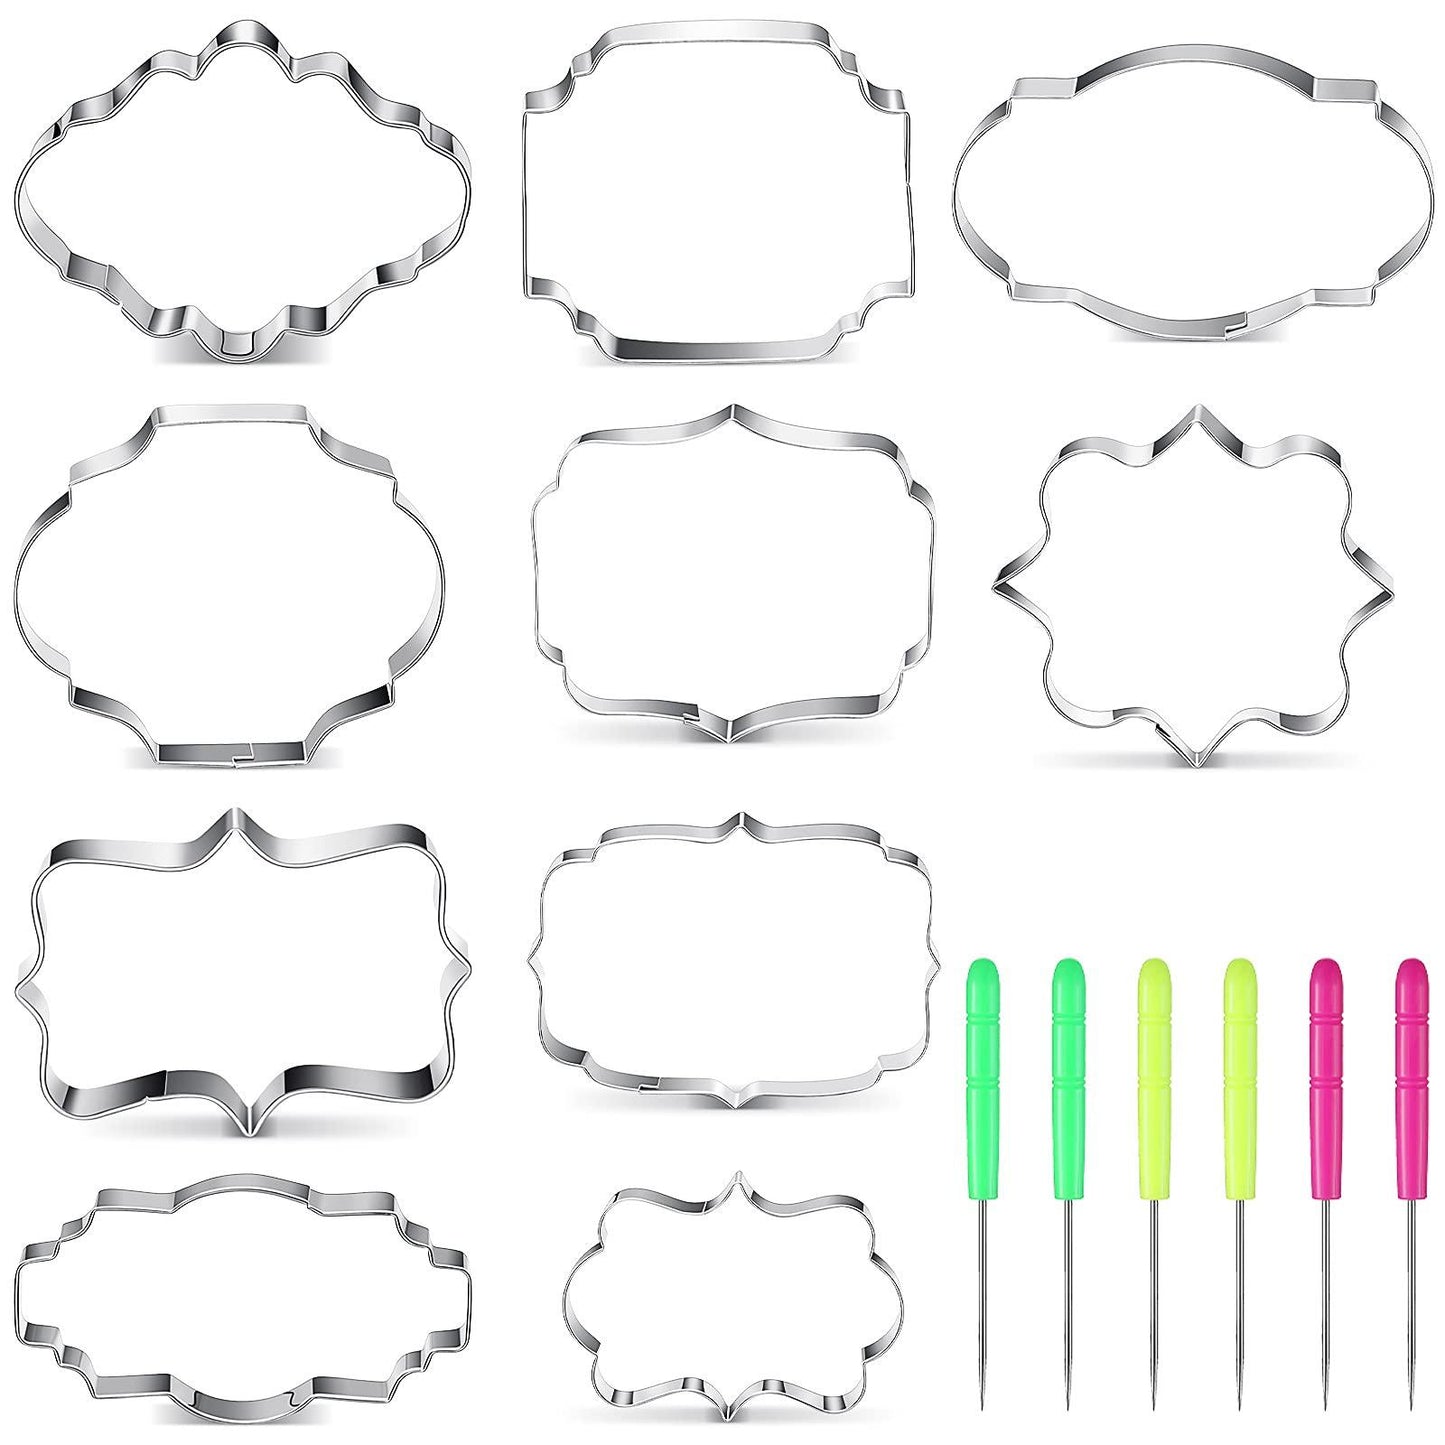 10 Pieces Plaque Frame Cookie Cutter Stainless Steel Biscuit Cutter Fondant Cake Decorating Tools and 6 Pieces Sugar Stirring Pins for Kitchen Baking - CookCave